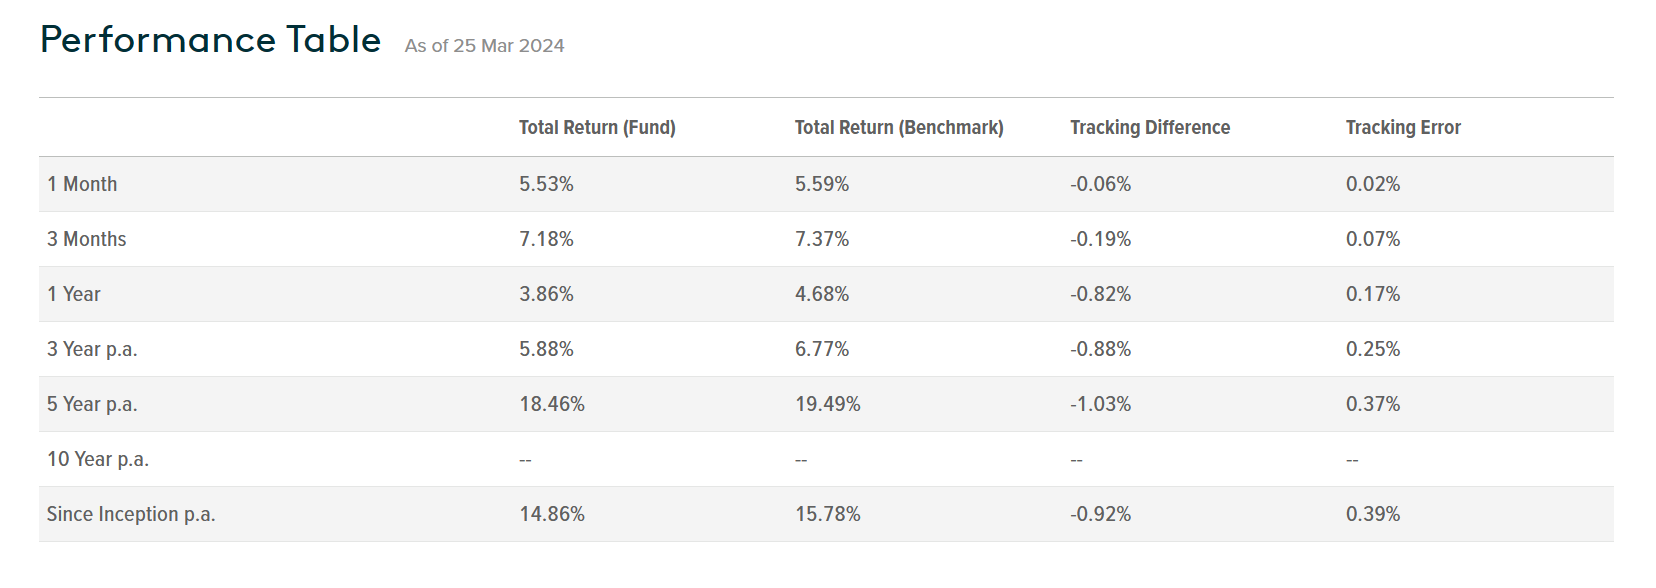 acdc total return performance table 2024